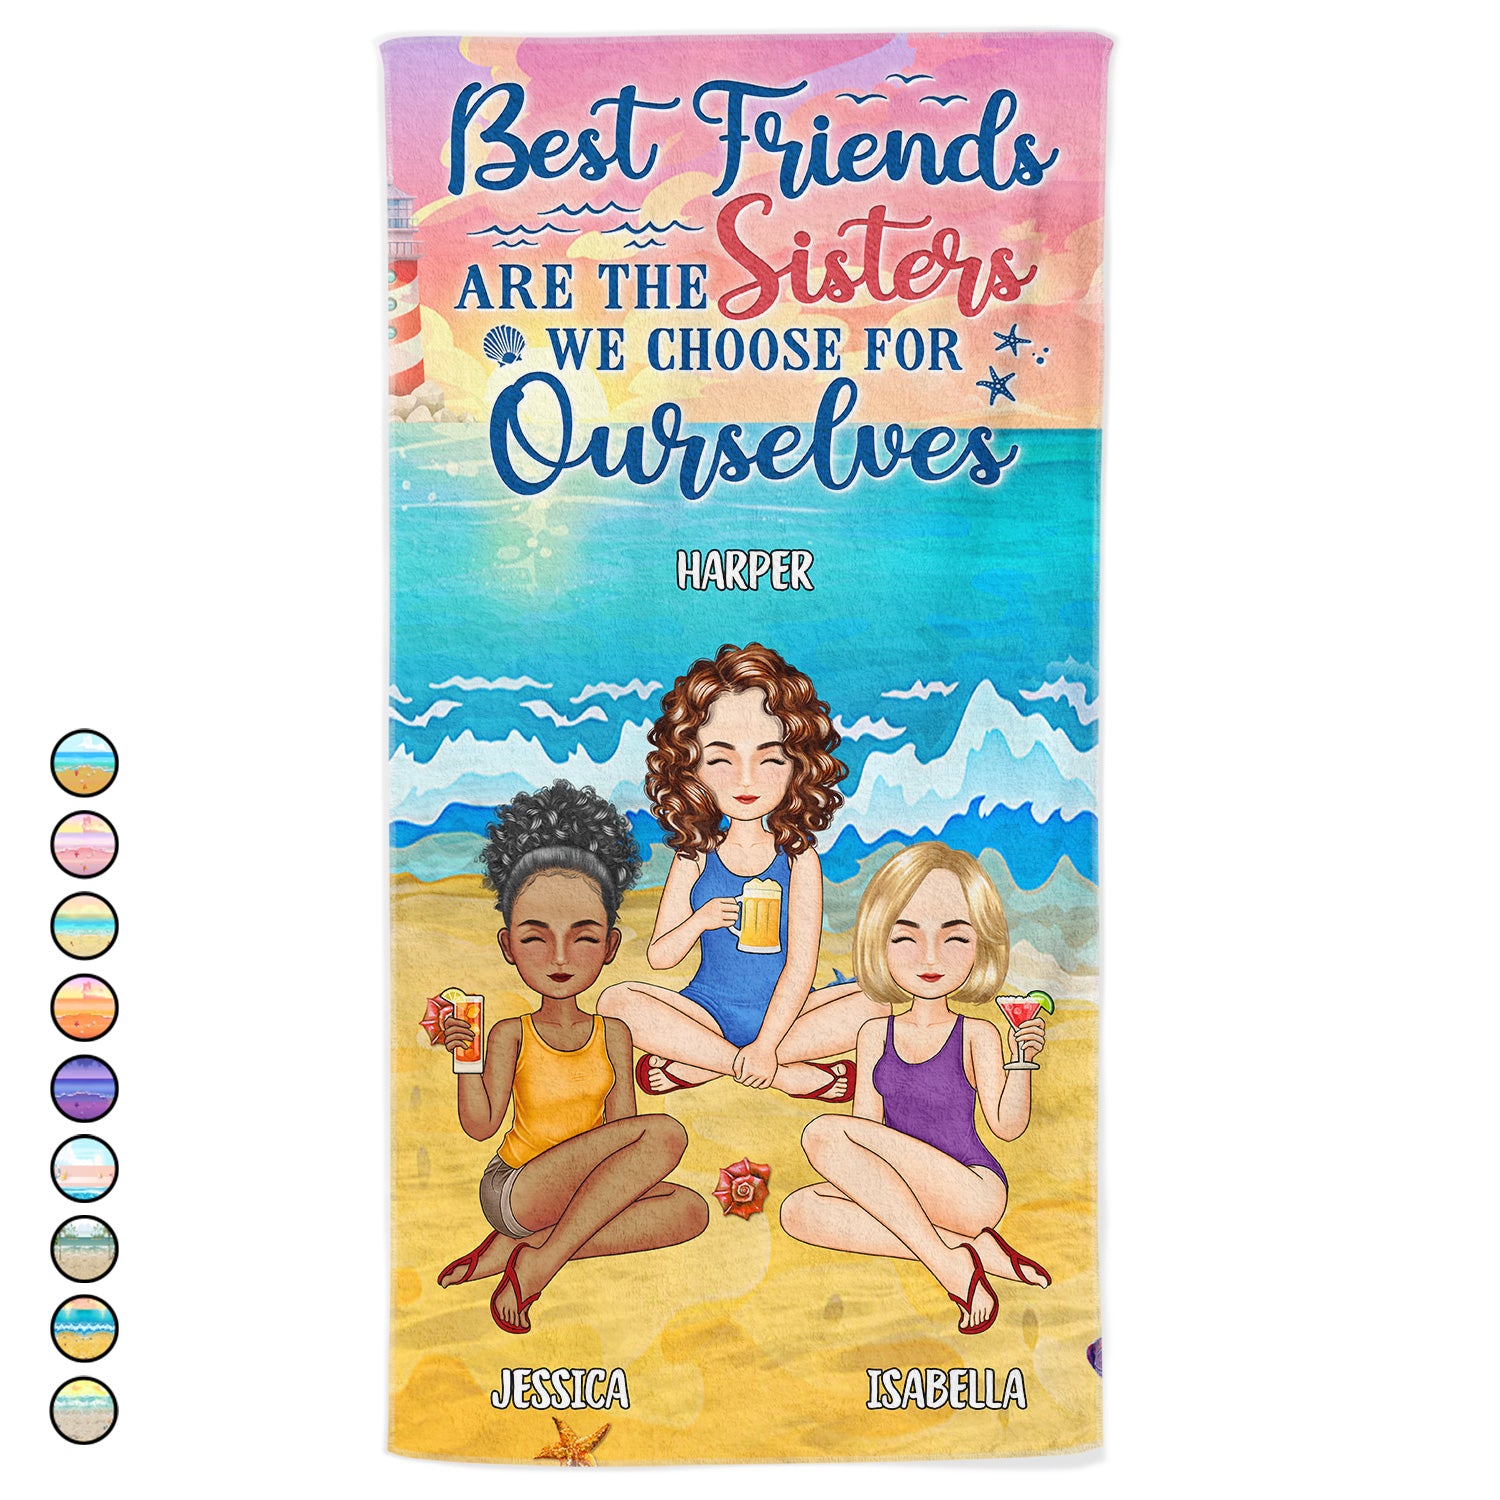 Best Friends Are The Sisters We Choose For Ourselves - Gift For BFF, Besties, Beach, Travel Lovers - Personalized Beach Towel